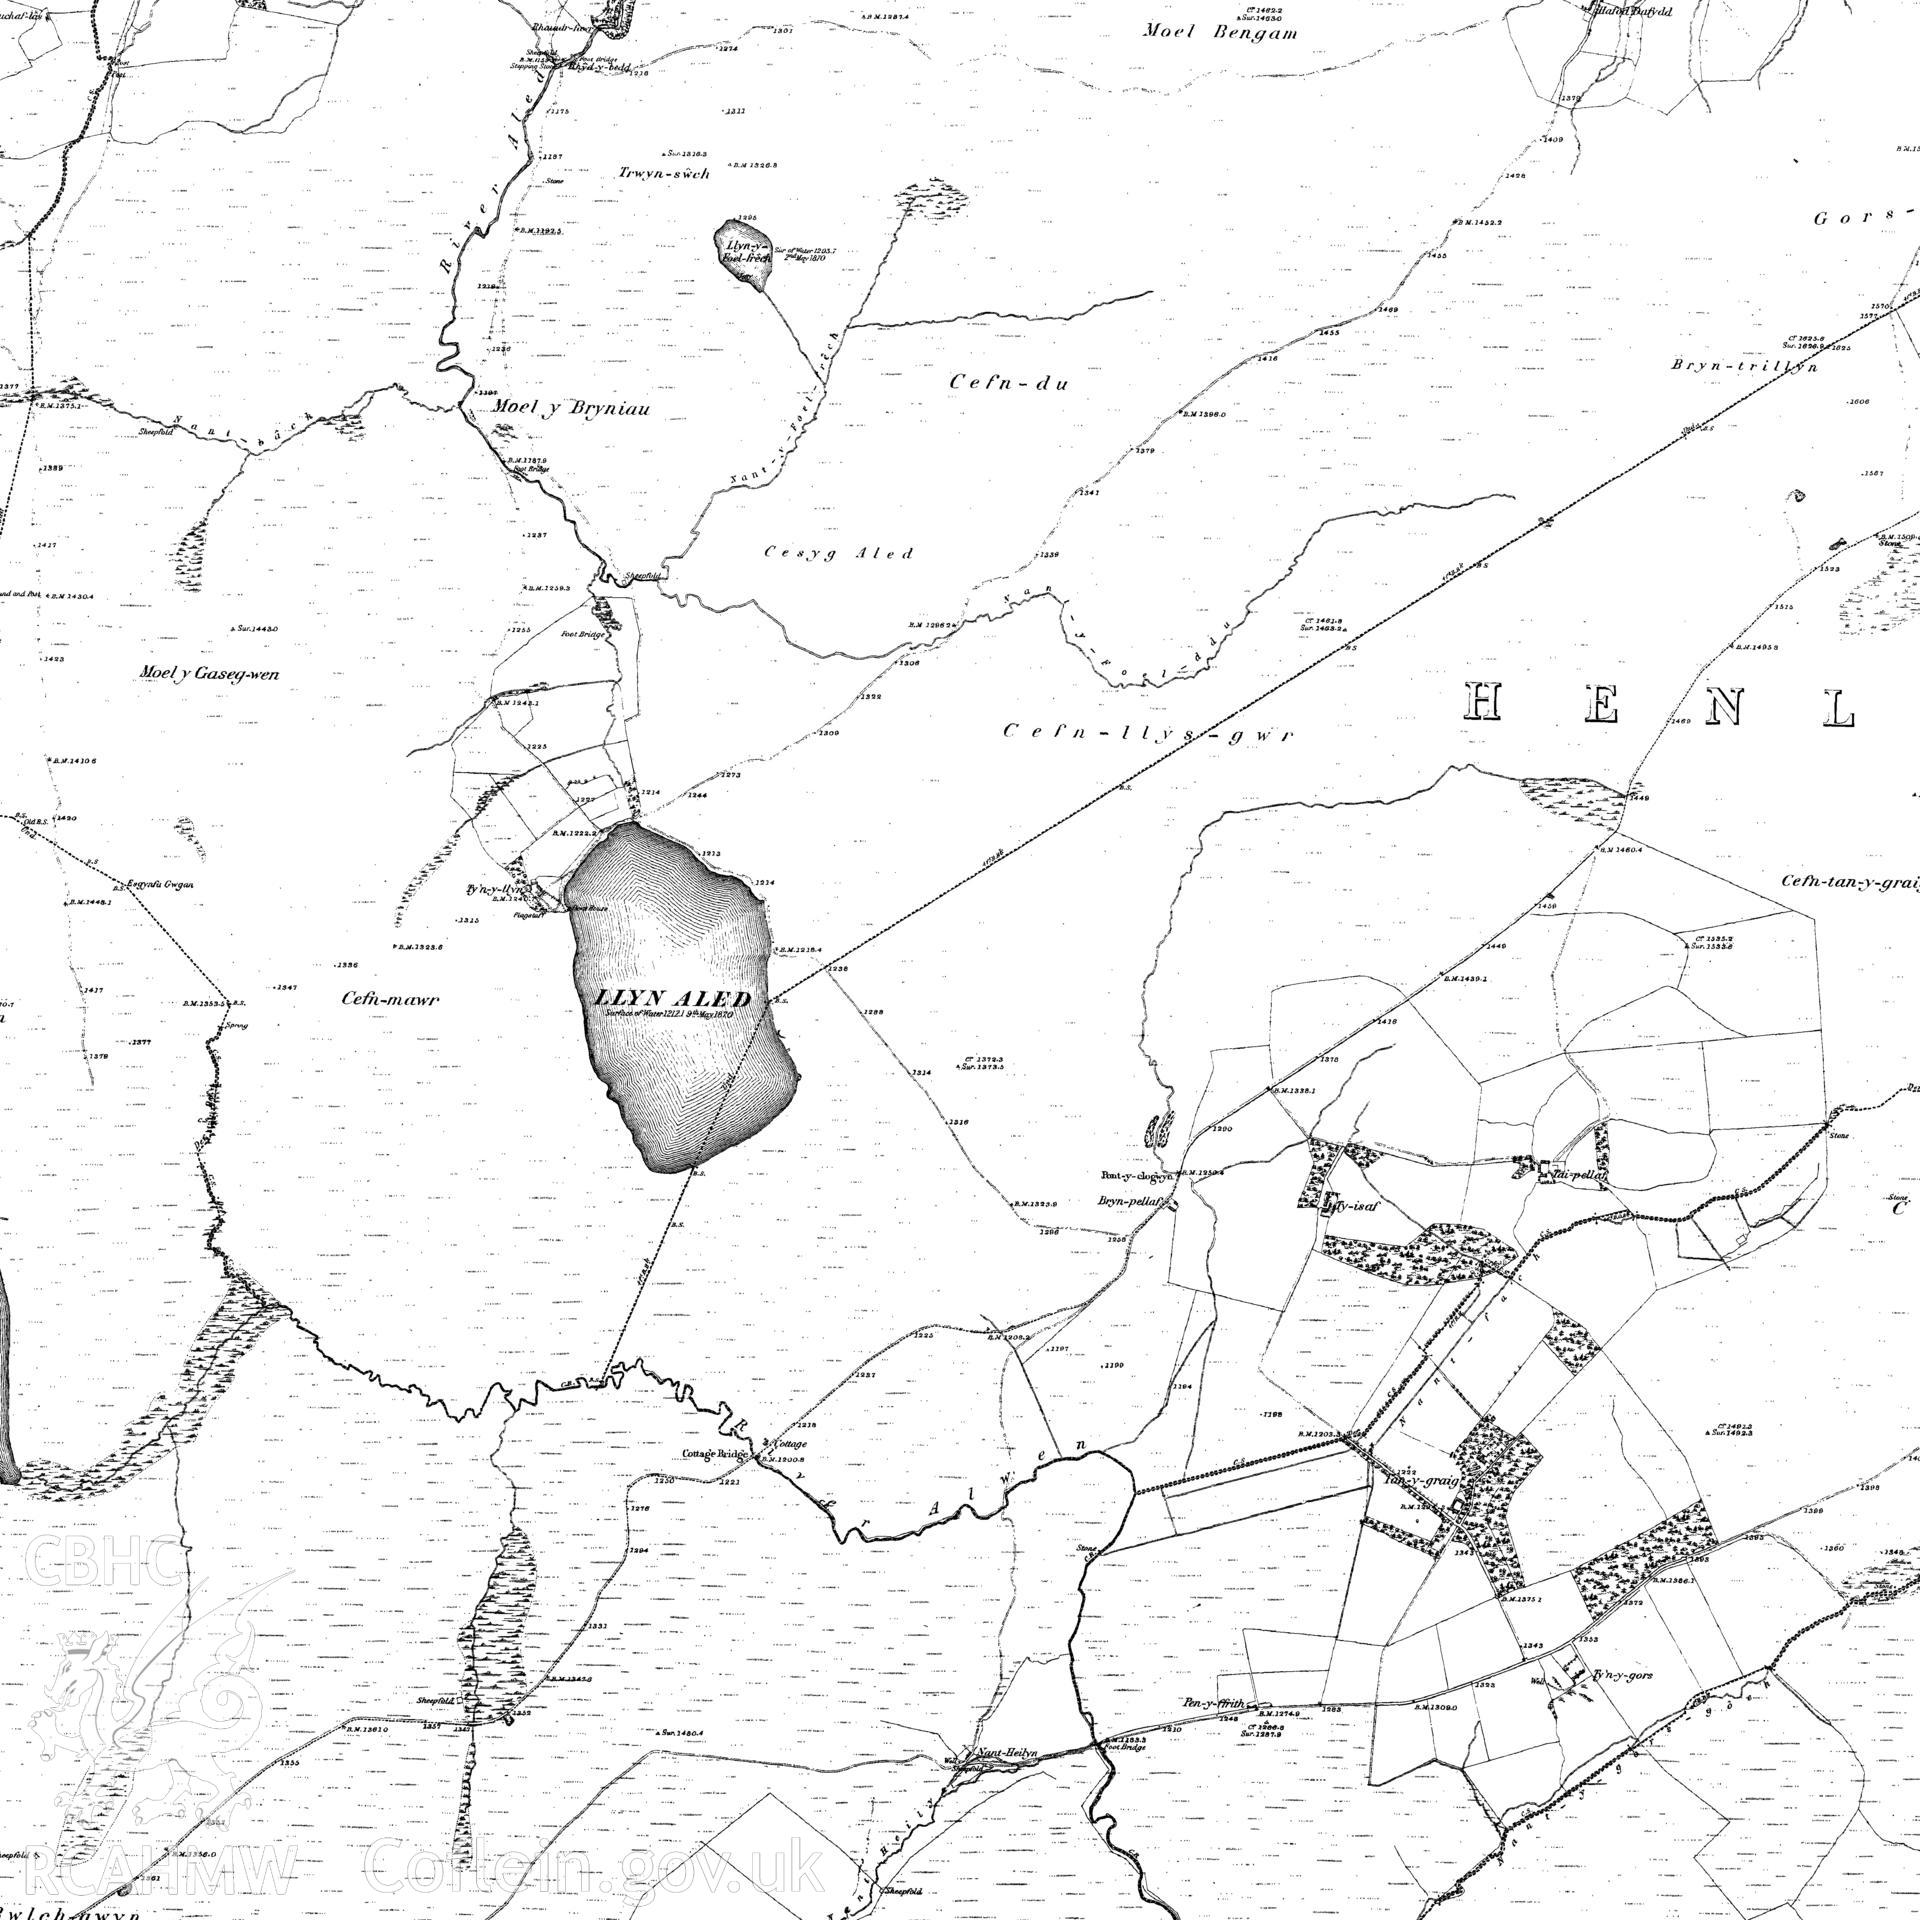 Digital copy of an Ordnance Survey map extract, showing the survey area. Map reference SH95NW.